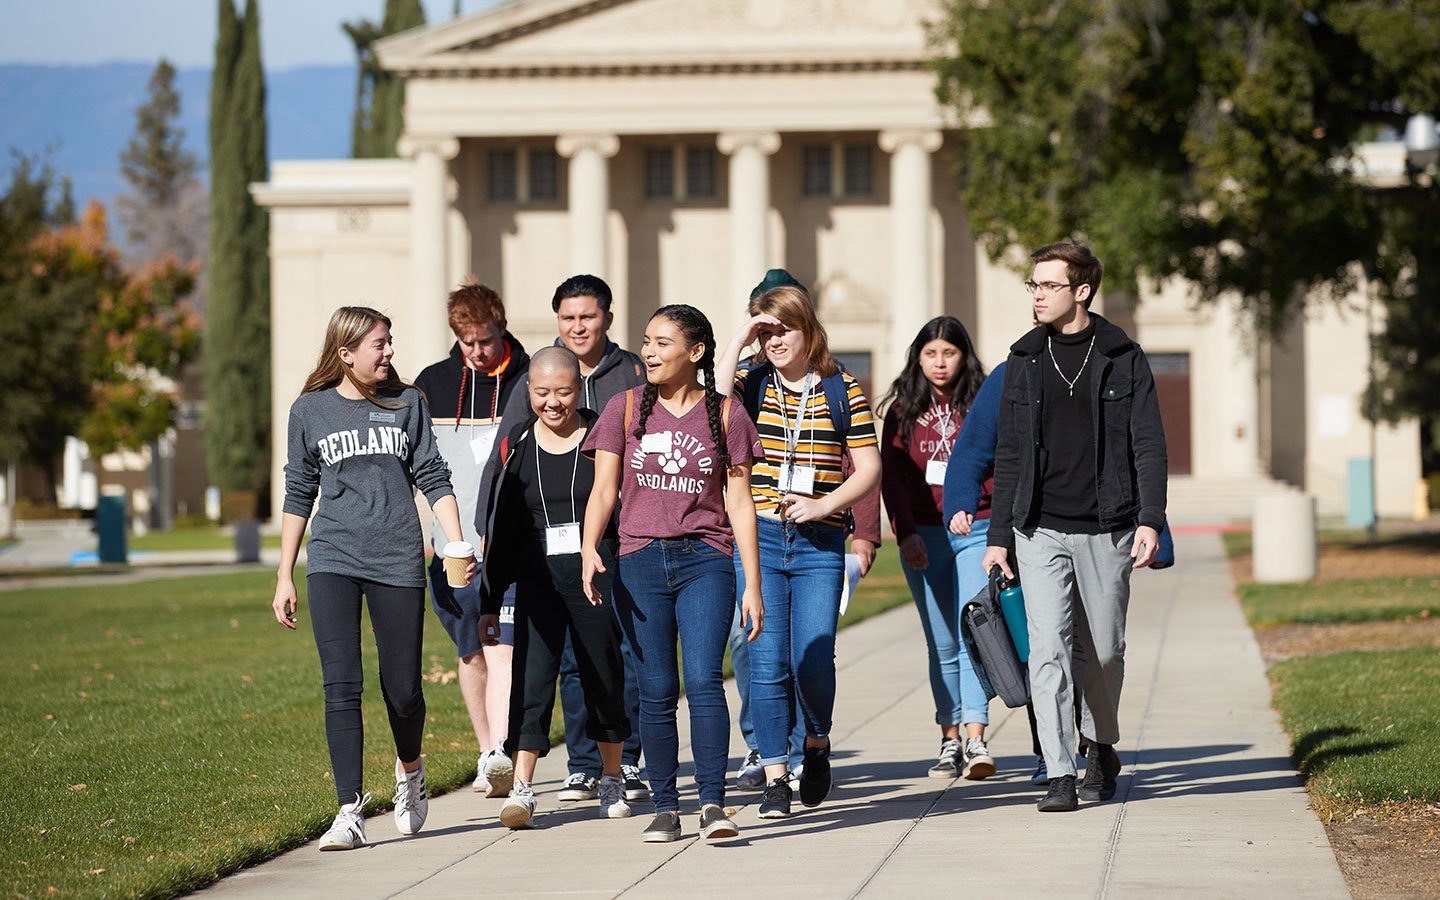 Students walking in the Quad